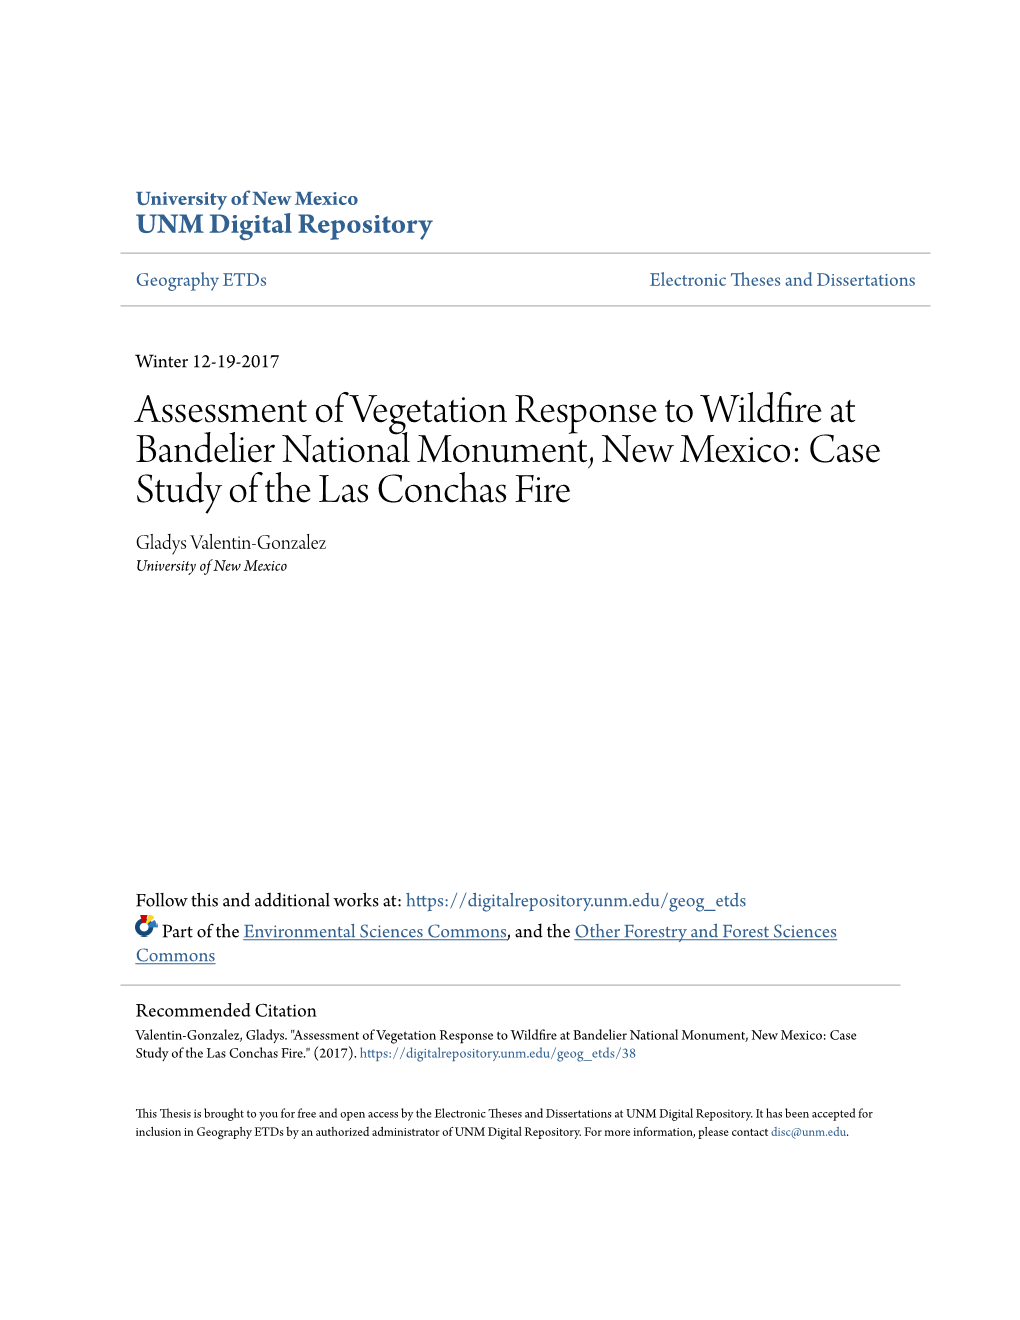 Assessment of Vegetation Response to Wildfire at Bandelier National